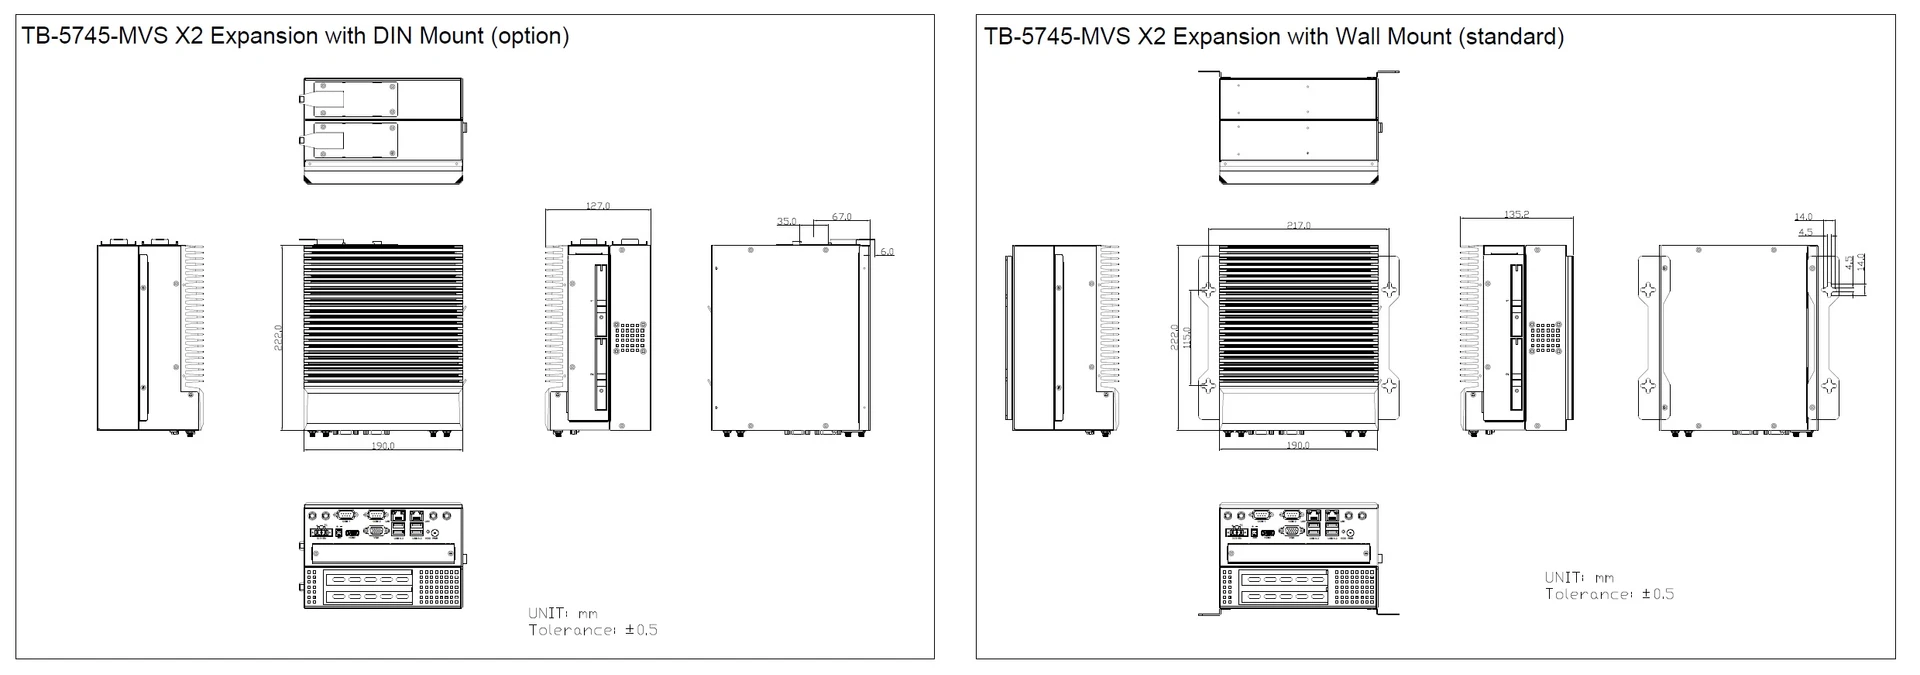 TB-5745 Technical Drawing 2x Expansion